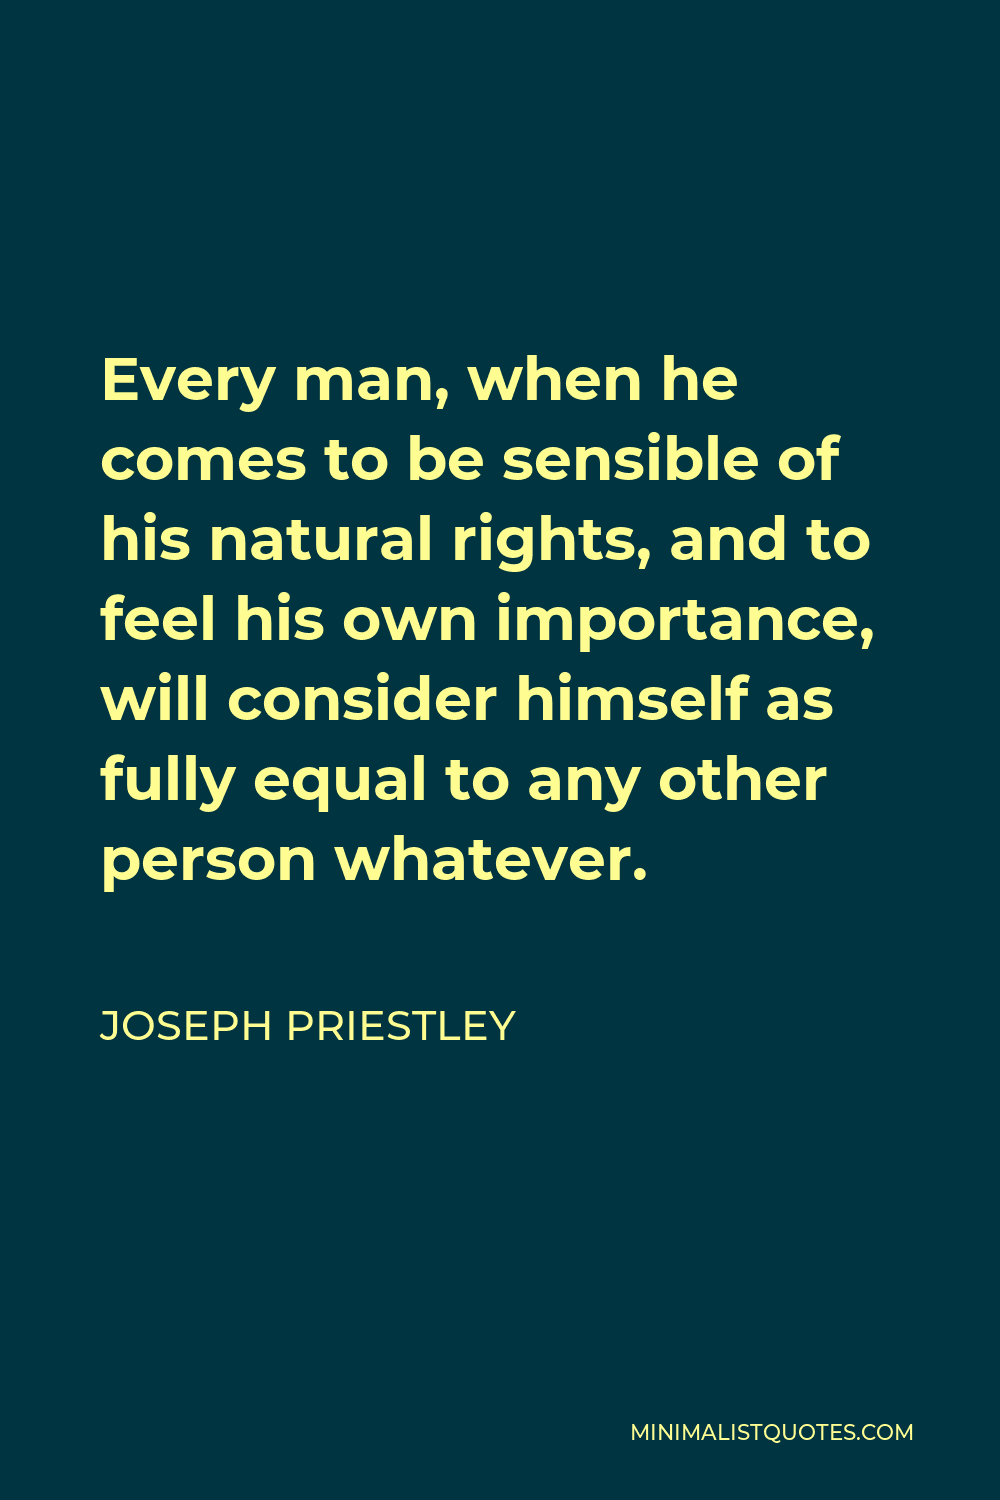 Joseph Priestley Quote - Every man, when he comes to be sensible of his natural rights, and to feel his own importance, will consider himself as fully equal to any other person whatever.